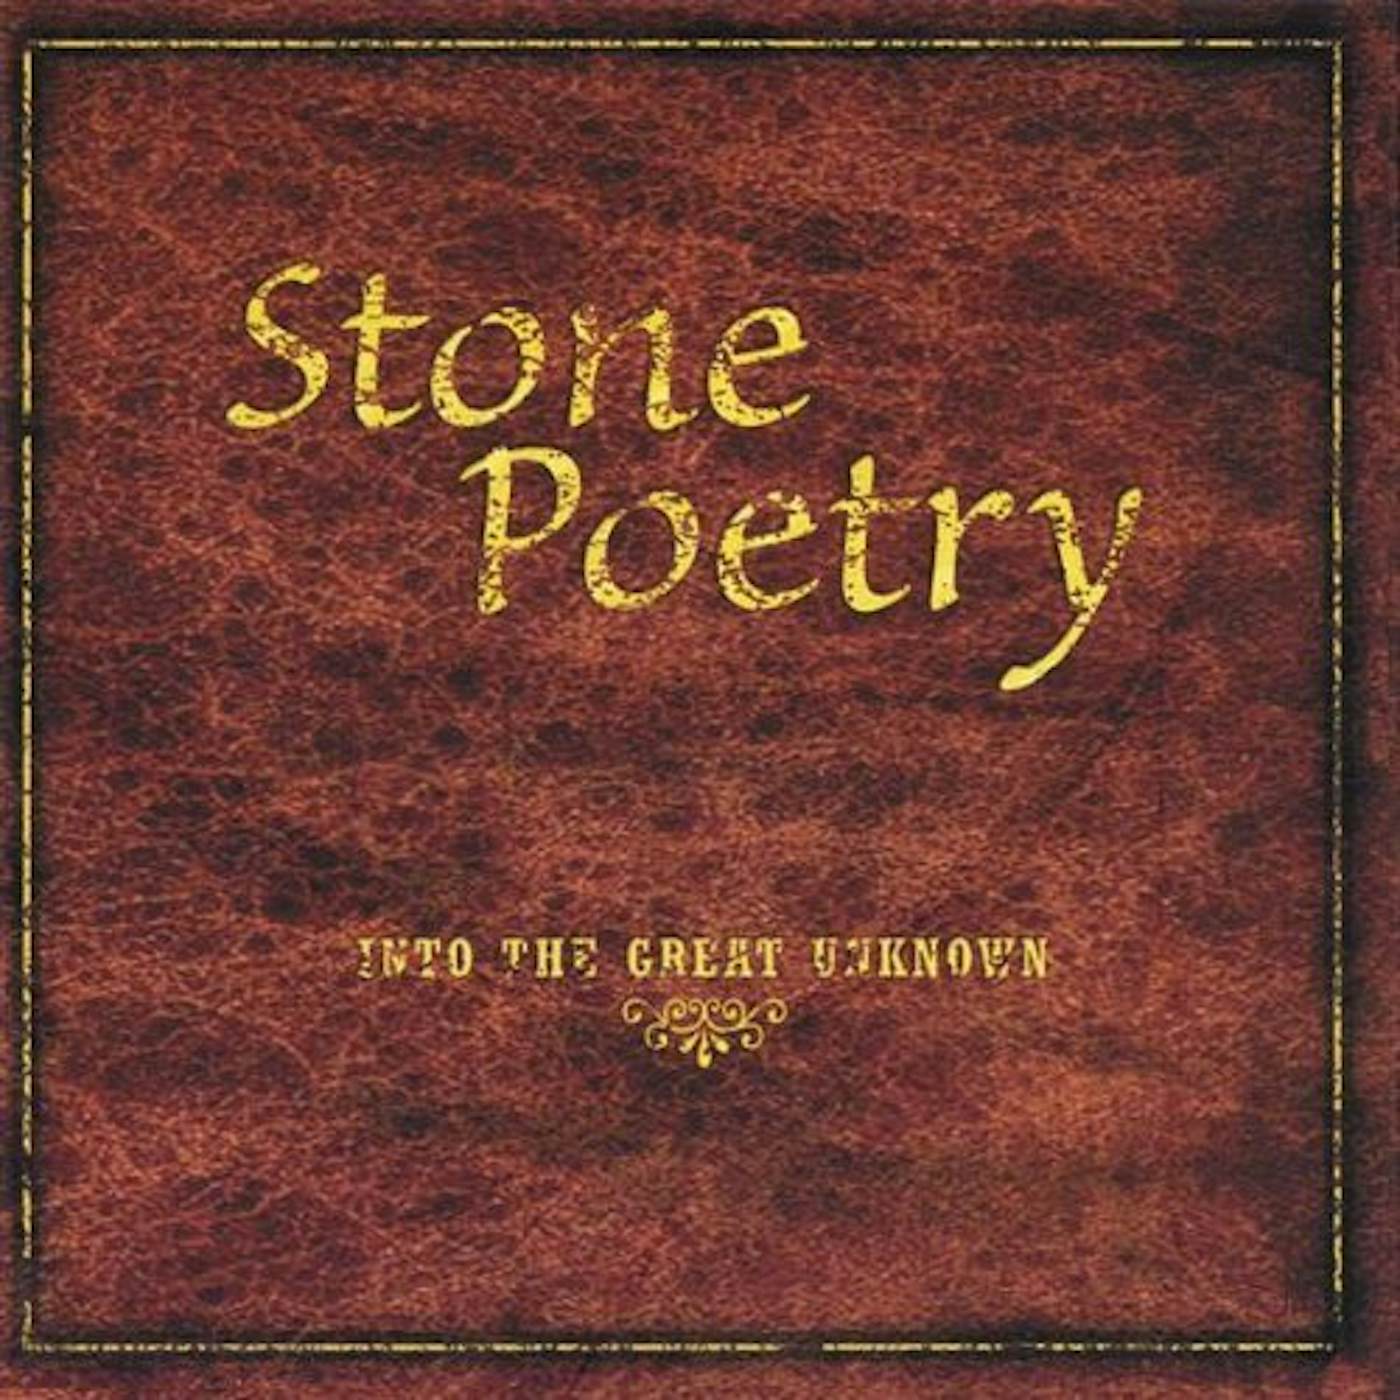 Stone Poetry INTO THE GREAT UNKNOWN CD